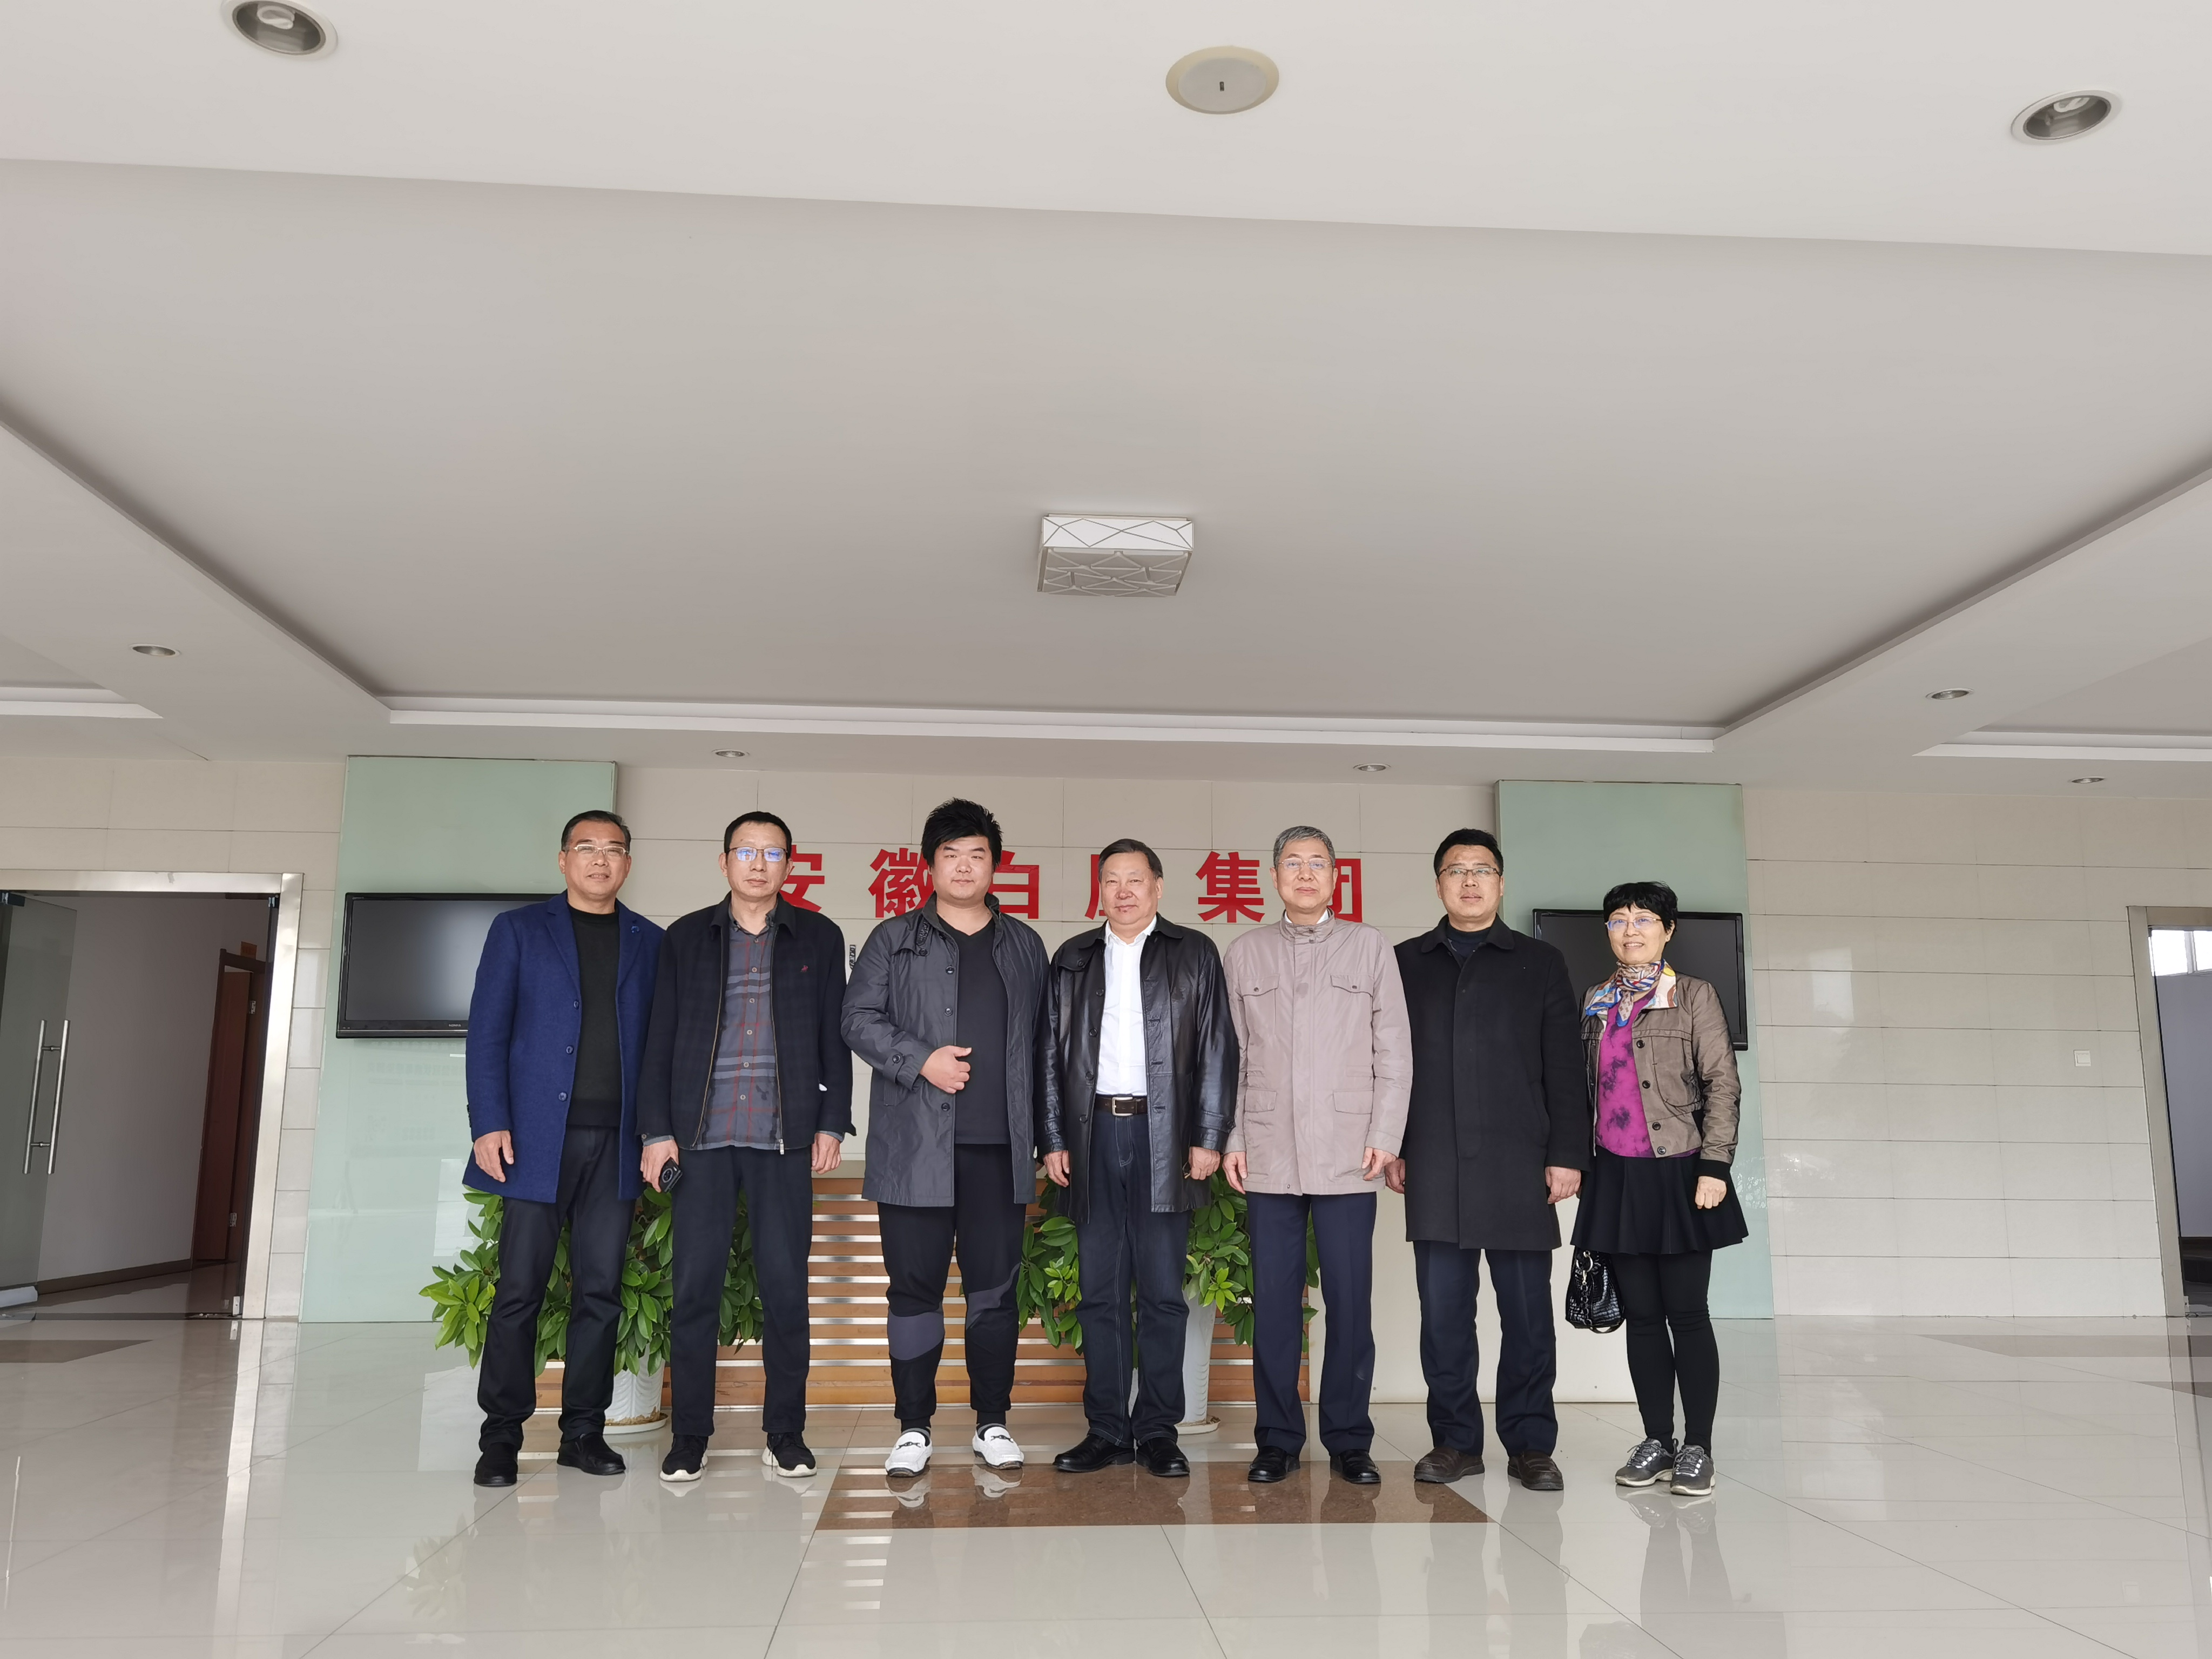 Professors from Hefei University of Technology visited our company